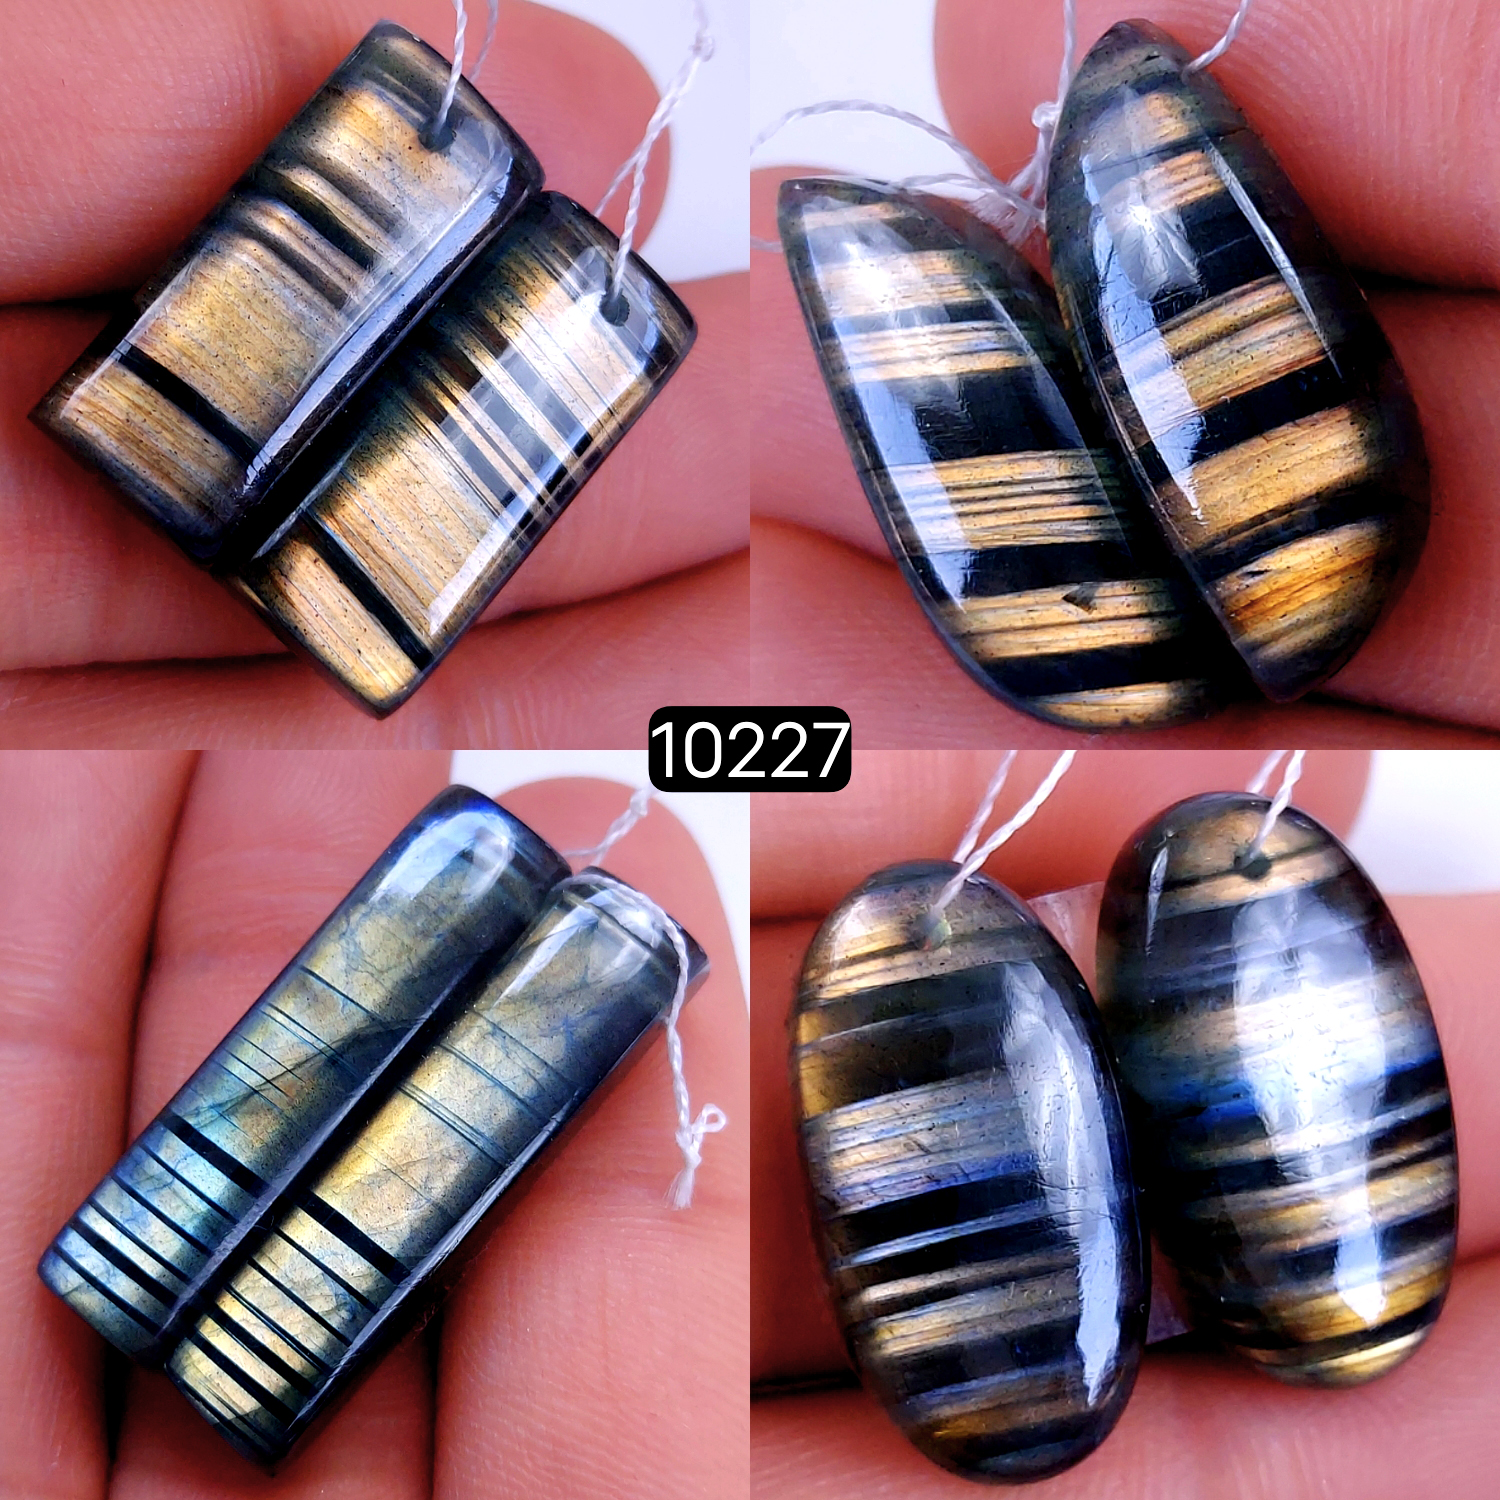 4Pair 131Cts Natural Labradorite Crystal Drill Dangle Drop Earring Pairs Silver Earrings Blue Labradorite Hoop Jewelry  32x8 22x12mm #10227